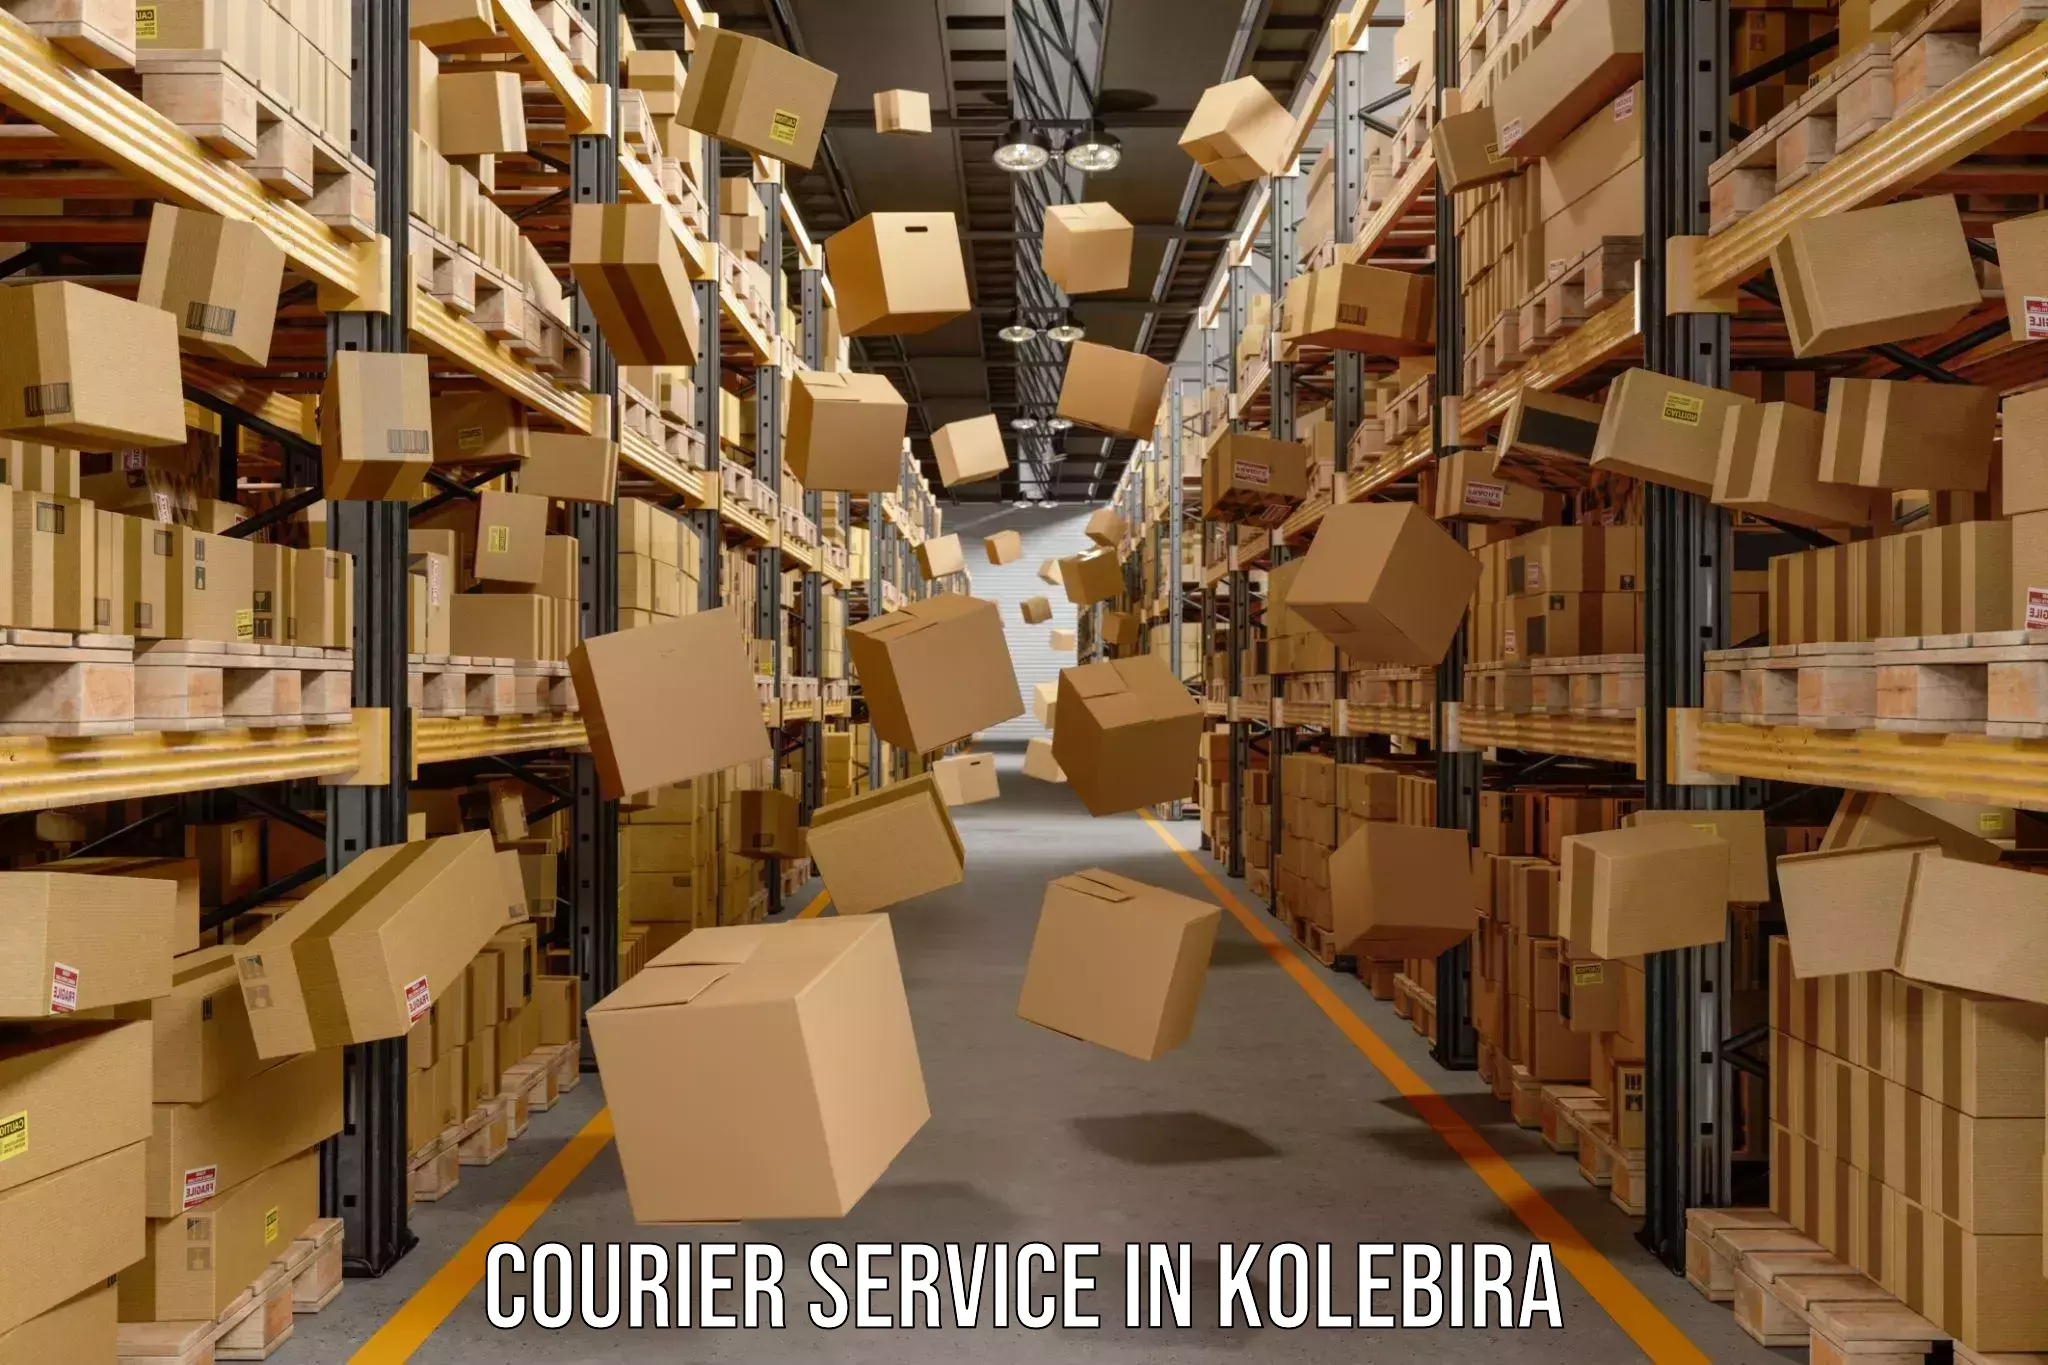 Next-day freight services in Kolebira